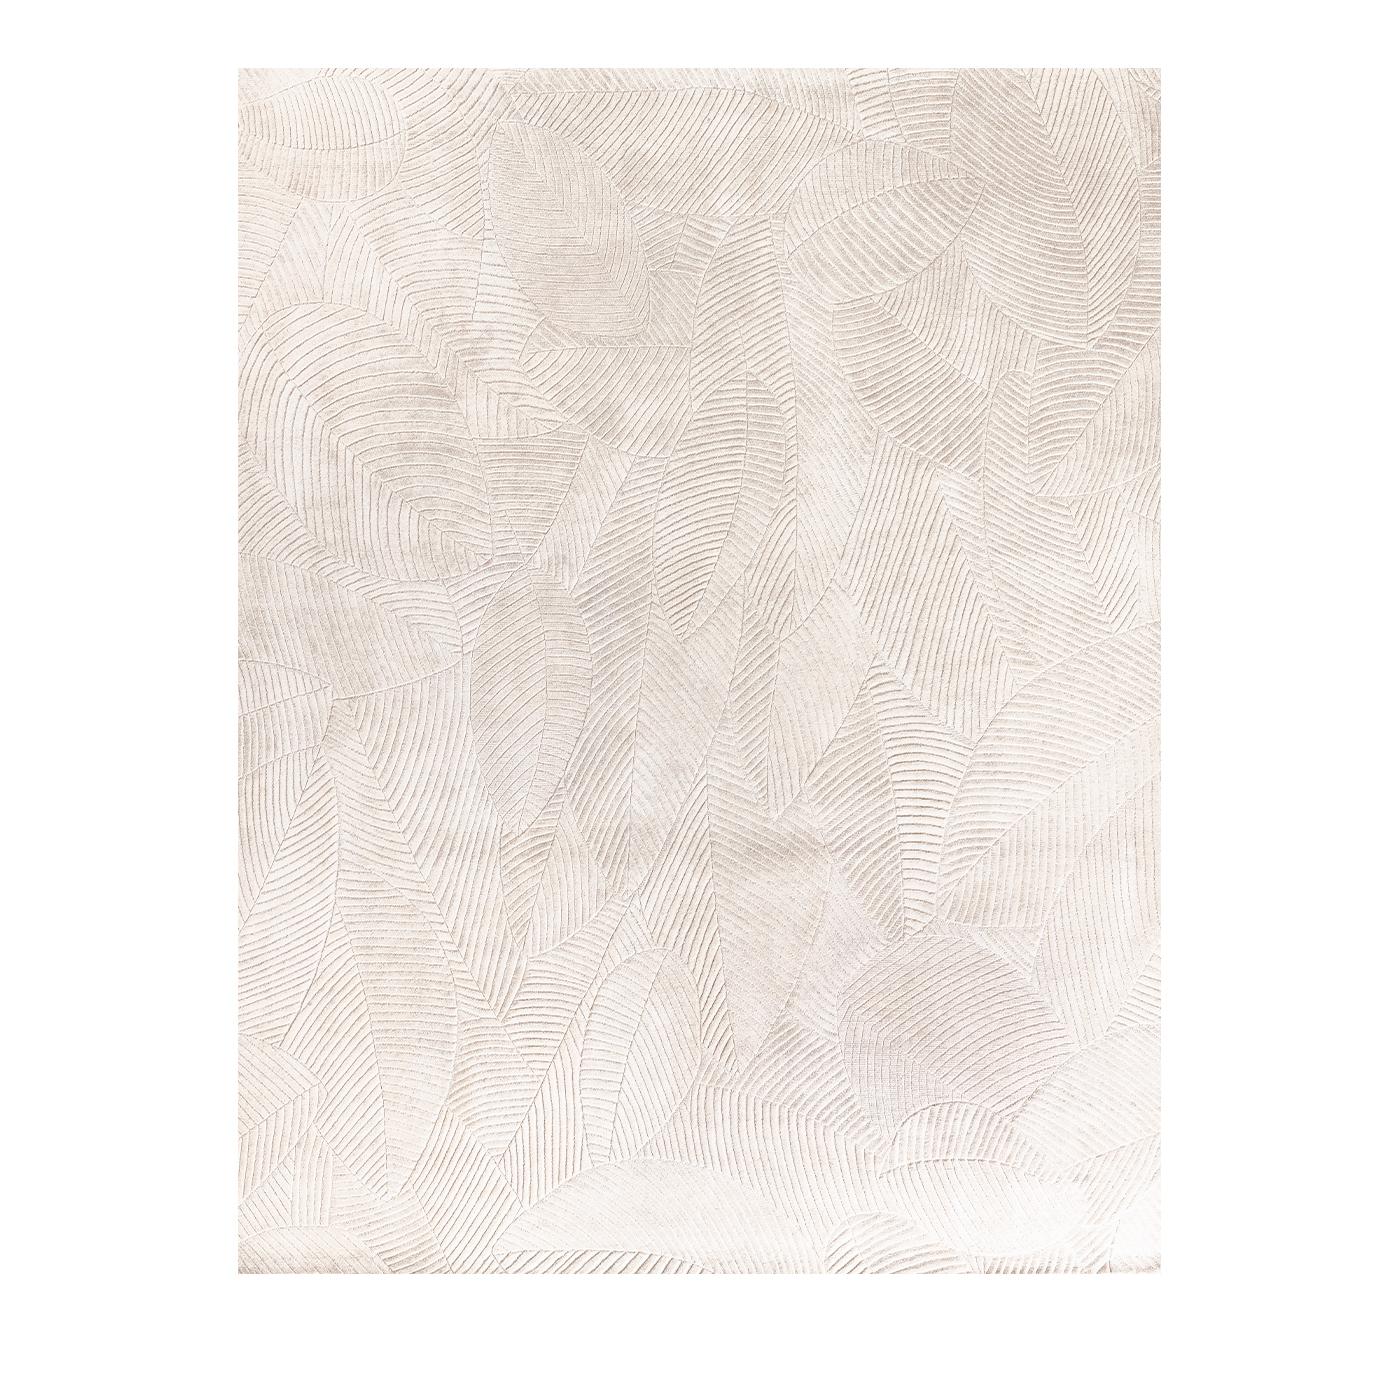 Composed of 50% silk and 50% Himalayan wool and at 300 x 240 cm in size, the limited edition Edra rug features an elegantly subtle pattern of fine lines for a delicate and Classic neutral look. The unique rug models are completely customizable in